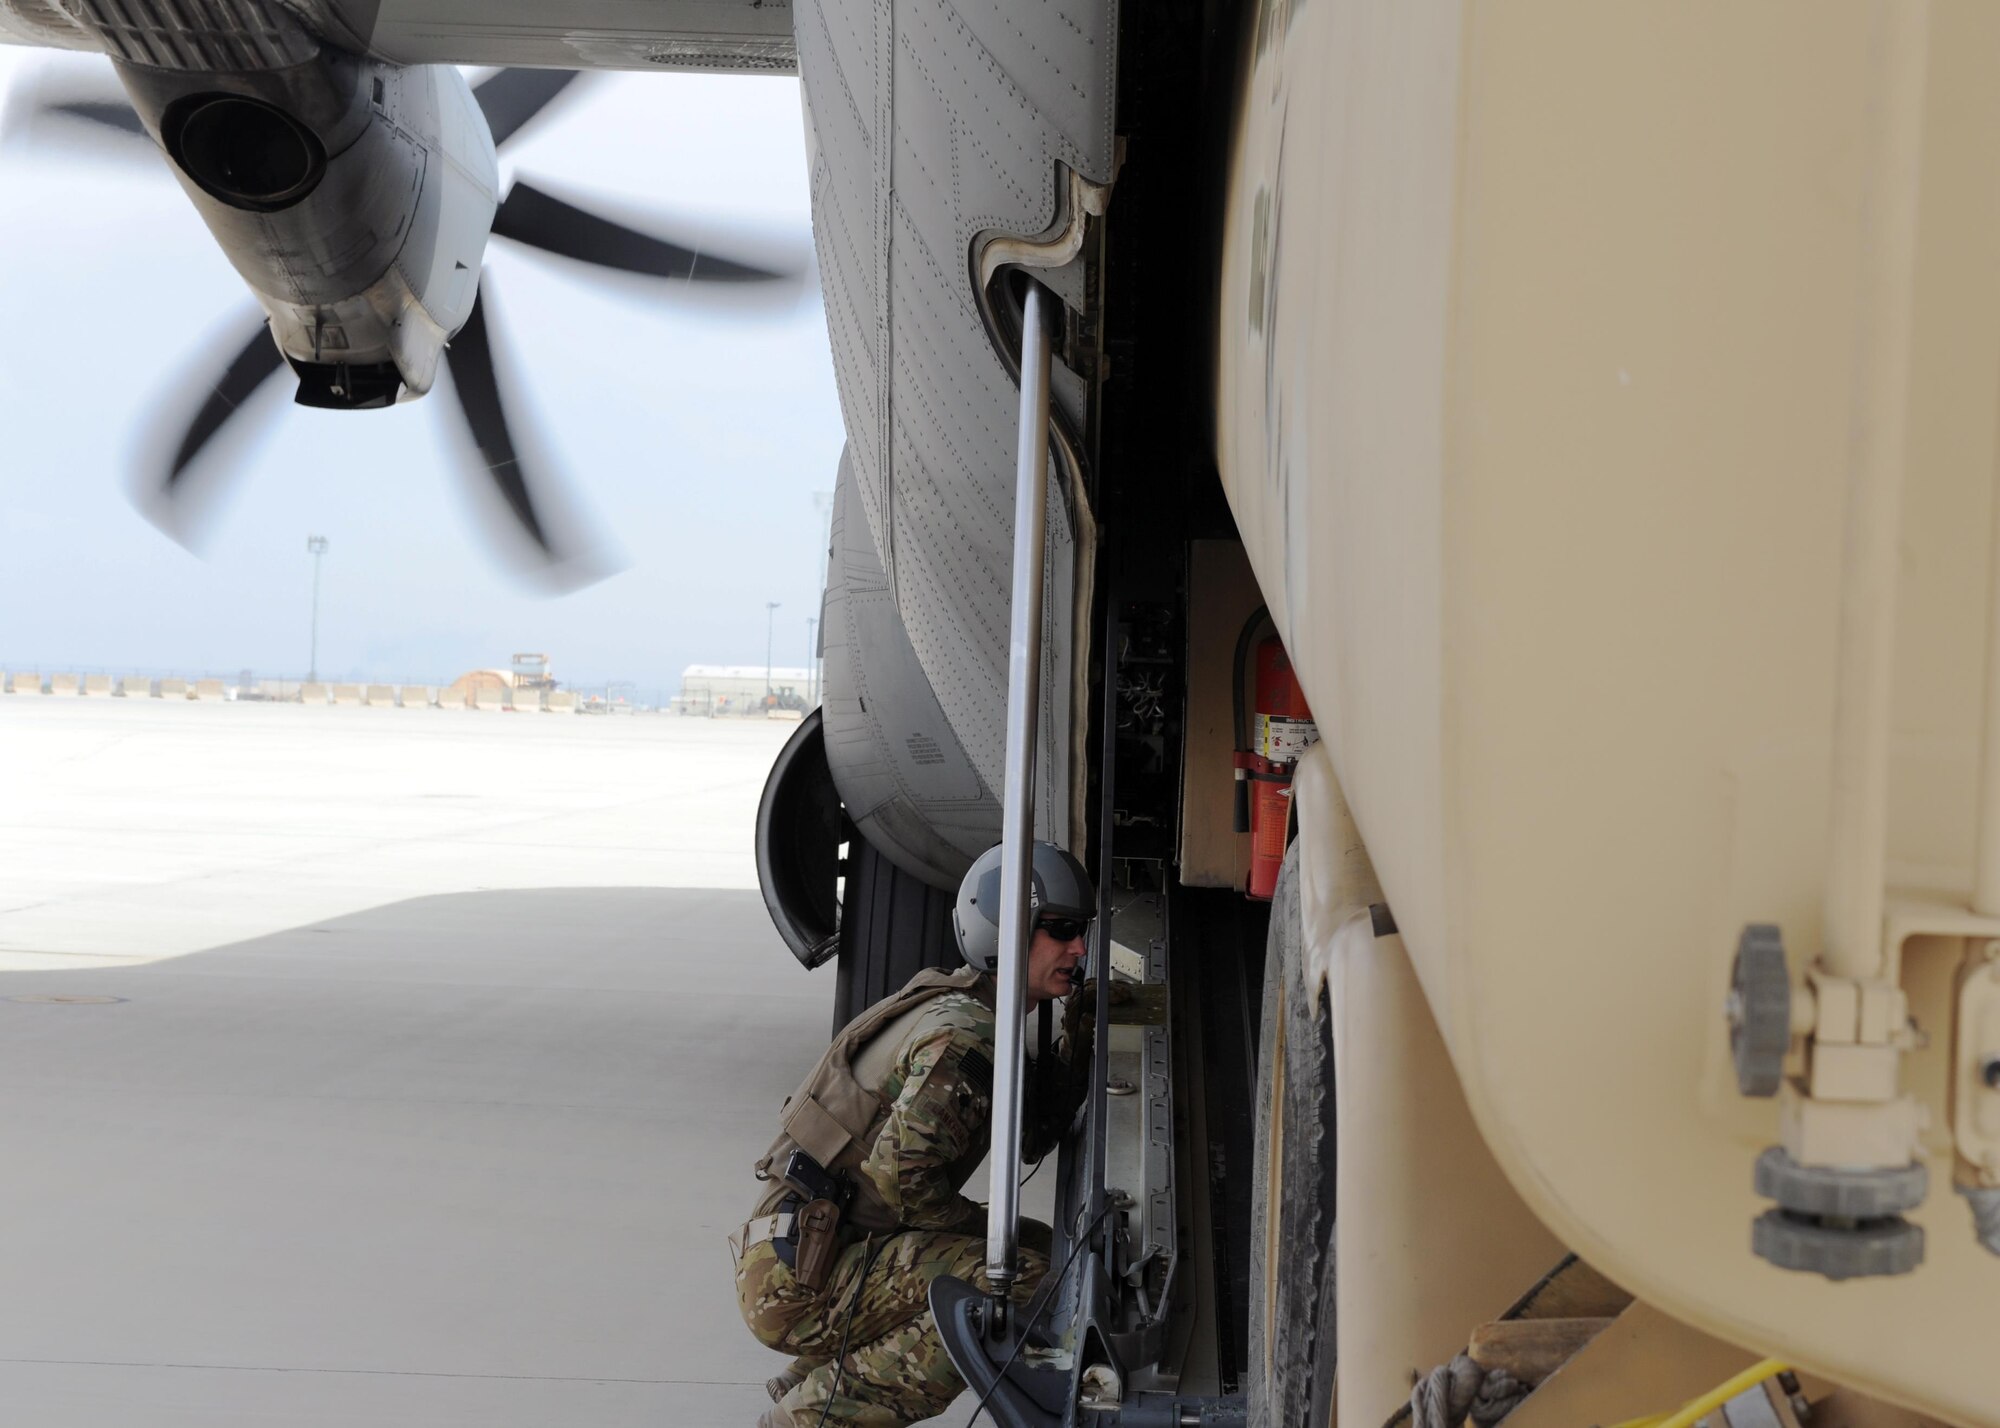 U.S. Air Force Lt. Col. Thomas Lankford, 774th Expeditionary Airlift Squadron commander, acts as a spotter as an R-11 fuel truck is loaded onto a C-130J Super Hercules aircraft during a redeployment mission at an undisclosed location in the Air Force Central Command area of responsibility March 15, 2015. The ability to forward deploy mission critical equipment, such as the R-11, to key sites throughout the AOR is more imperative than ever before as the Air Force reduces its footprint in the region. (U.S. Air Force photo by Staff Sgt. Whitney Amstutz)